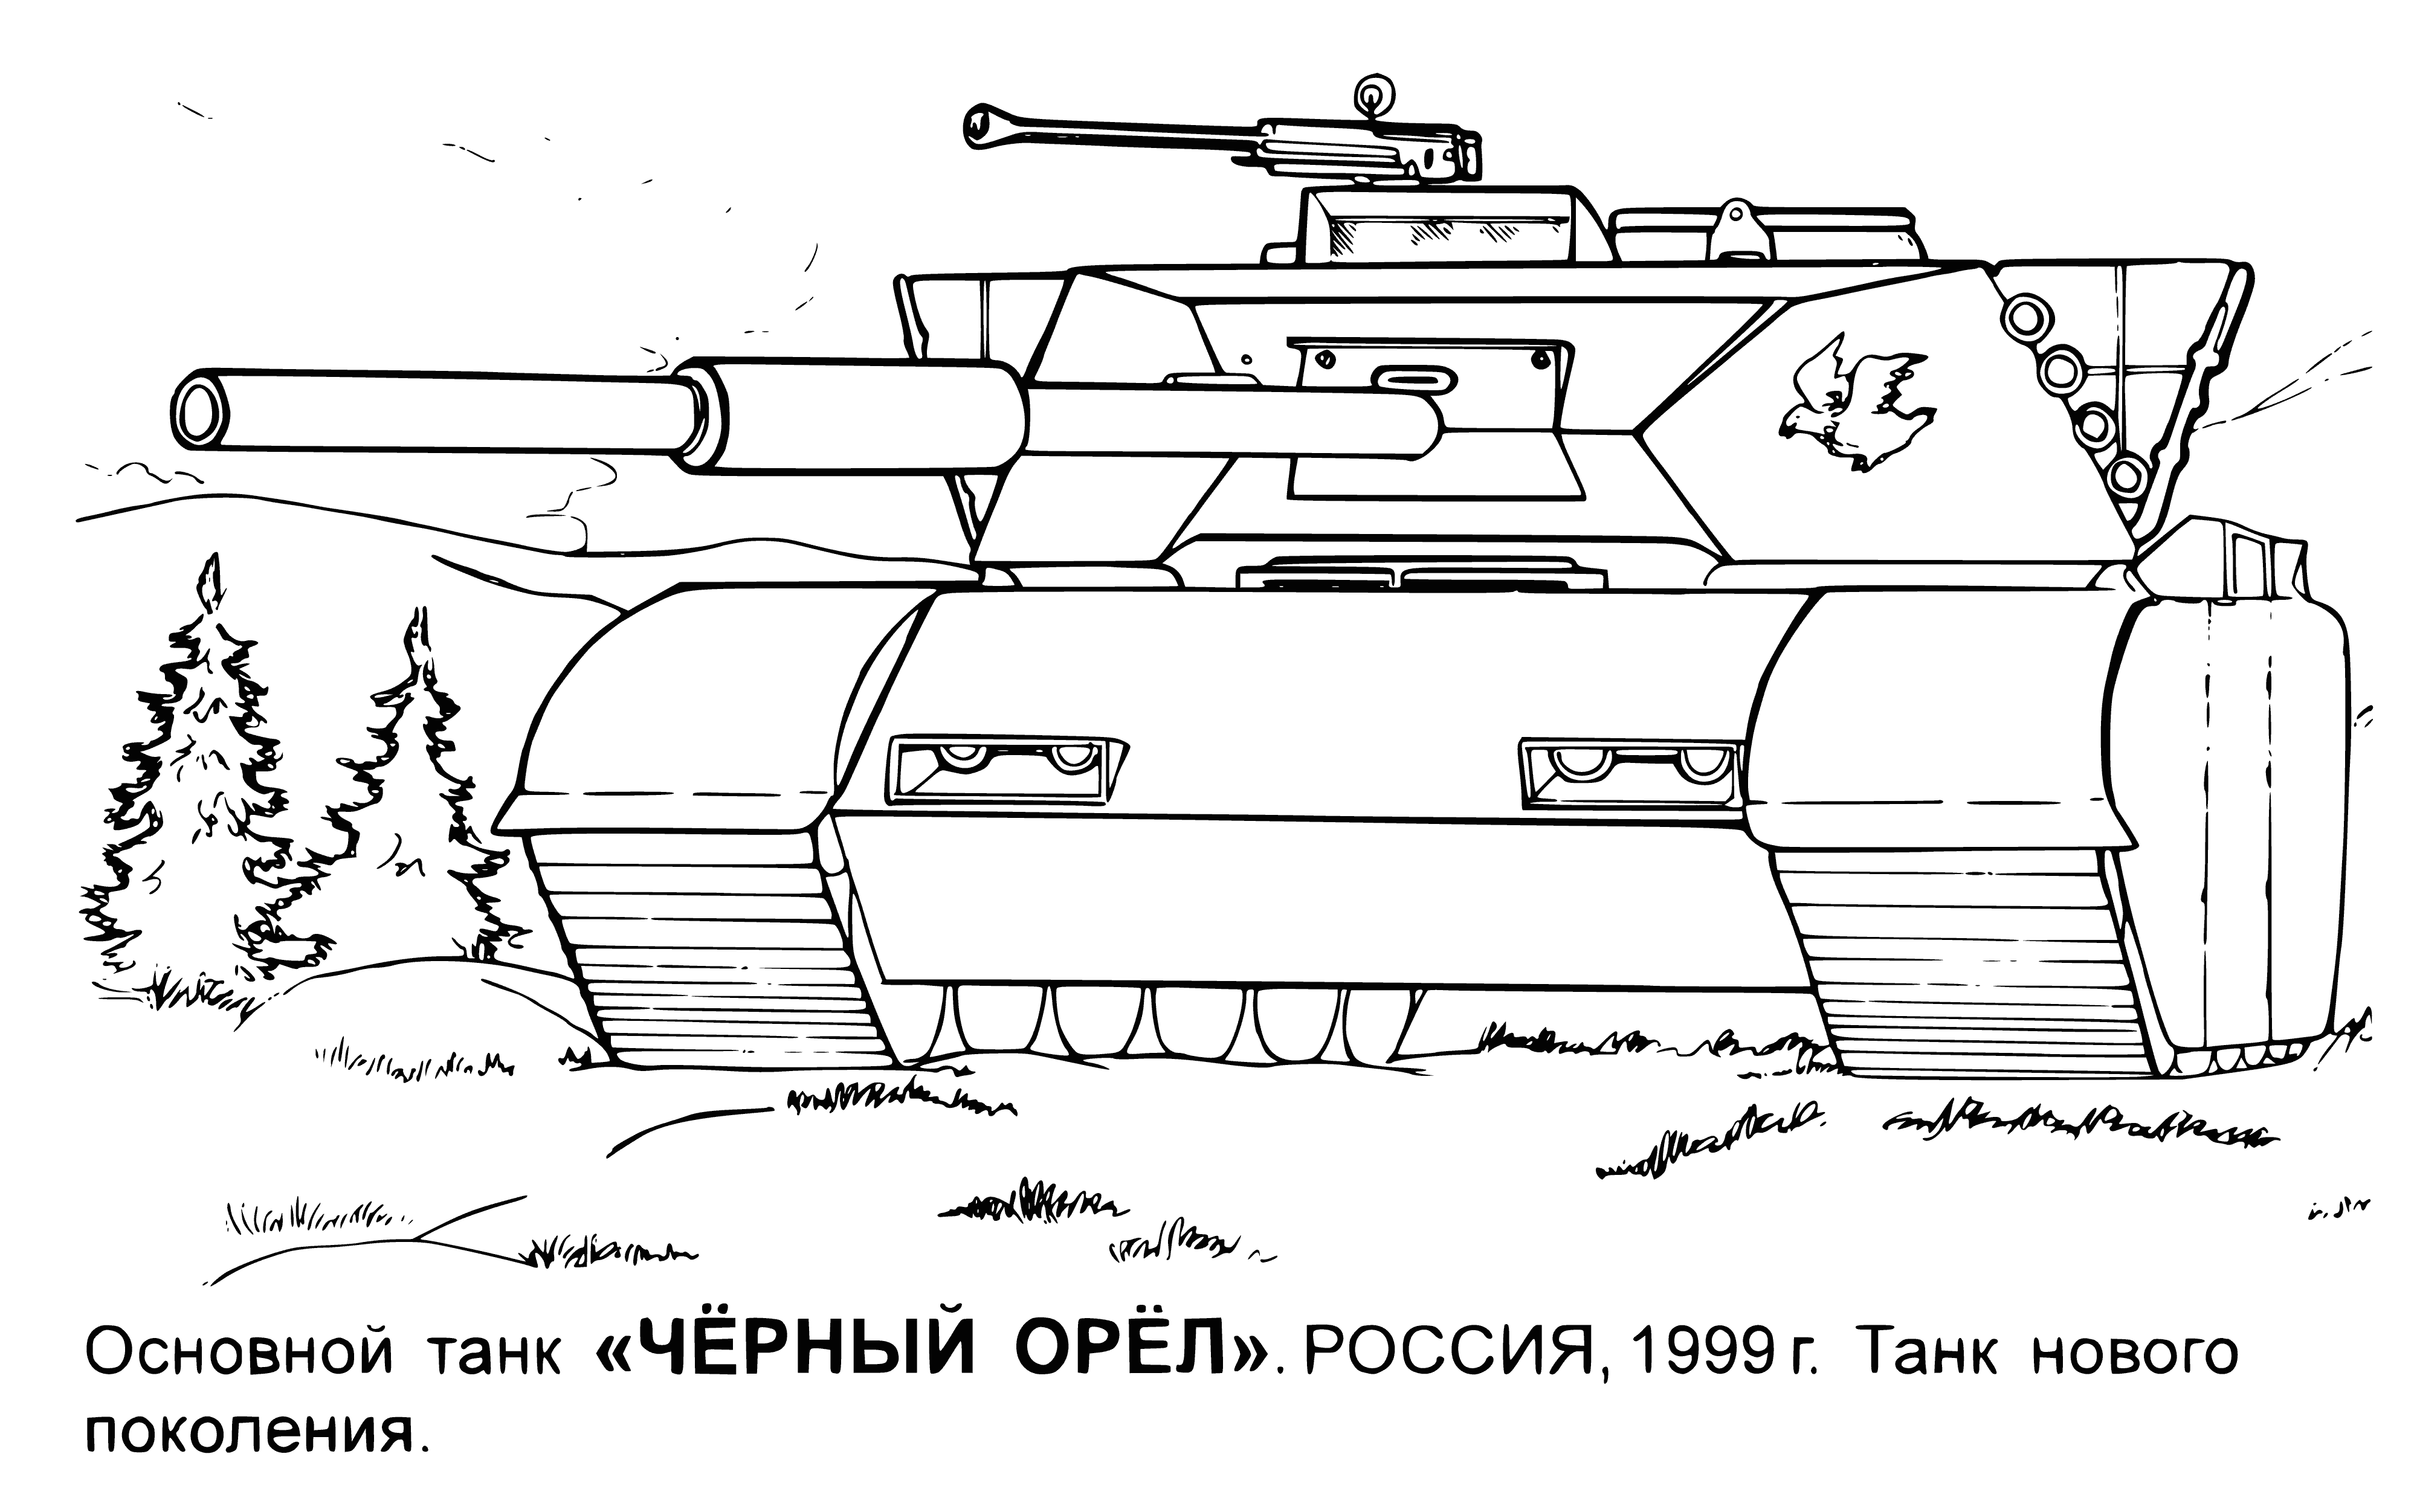 coloring page: Russian tanks are heavy and tough, designed to take a lot of damage.